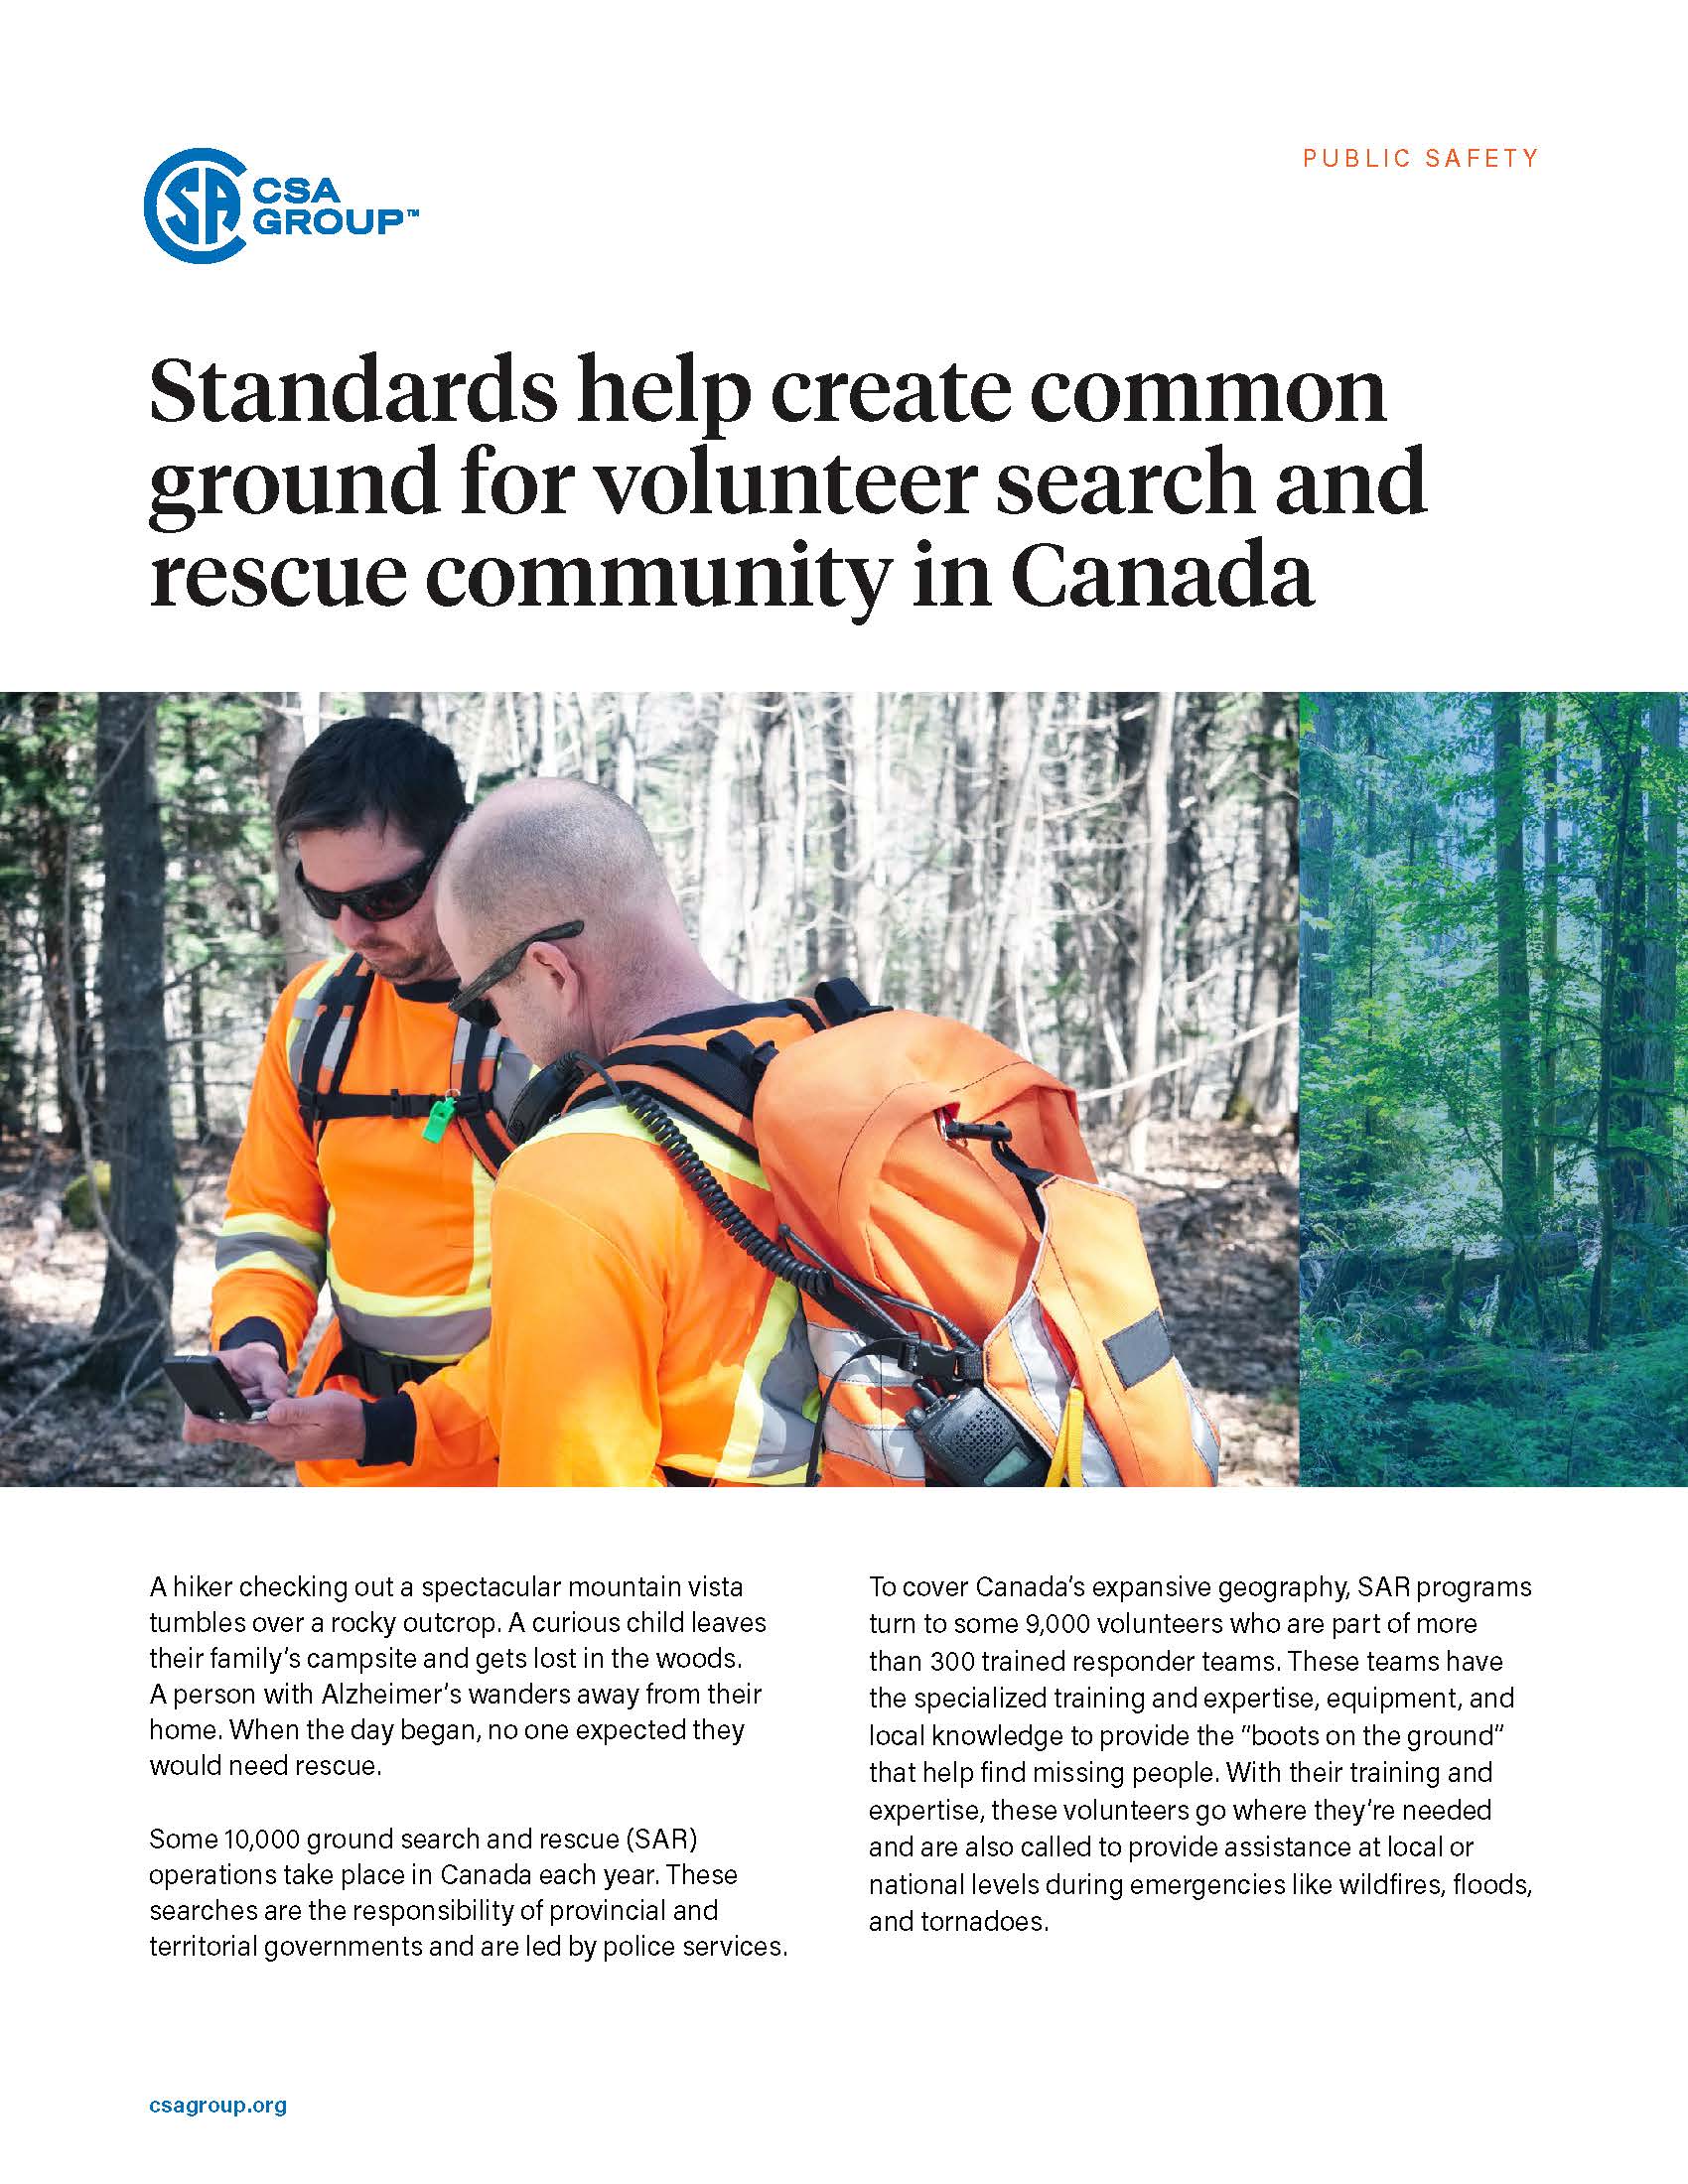 Featured Image. Standards help create common ground for volunteer search and rescue community in Canada